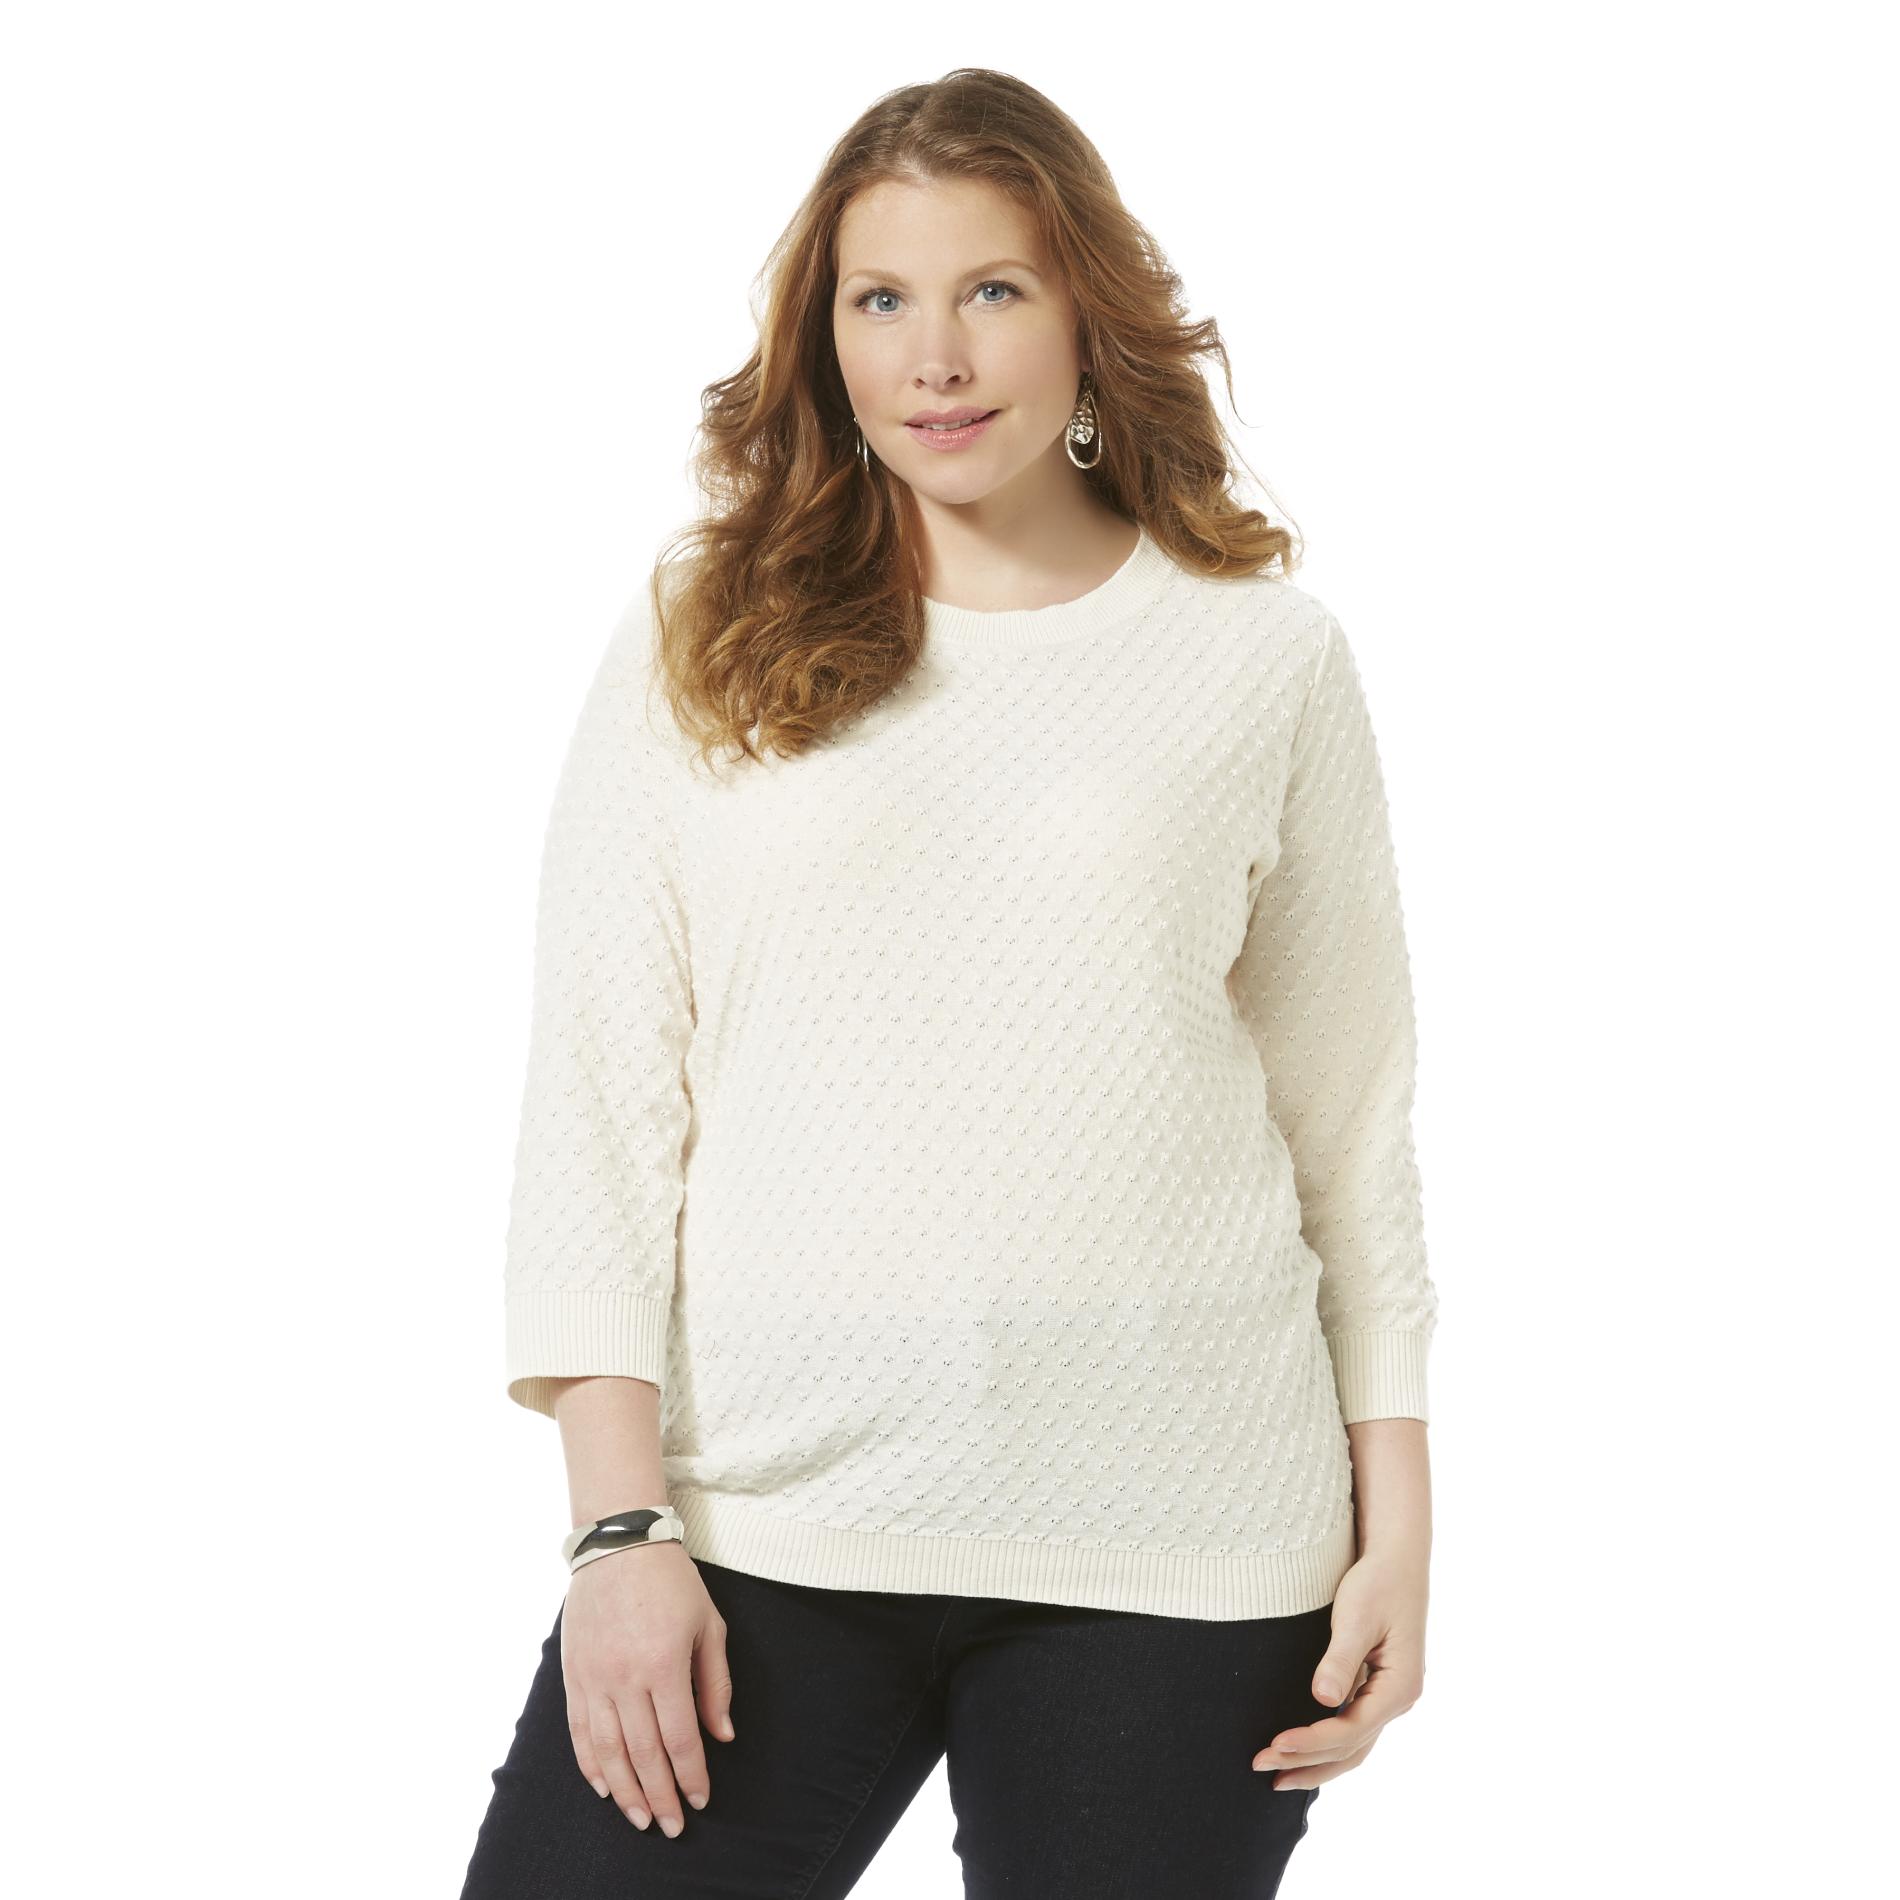 Basic Editions Women's Plus Textured Knit Sweater